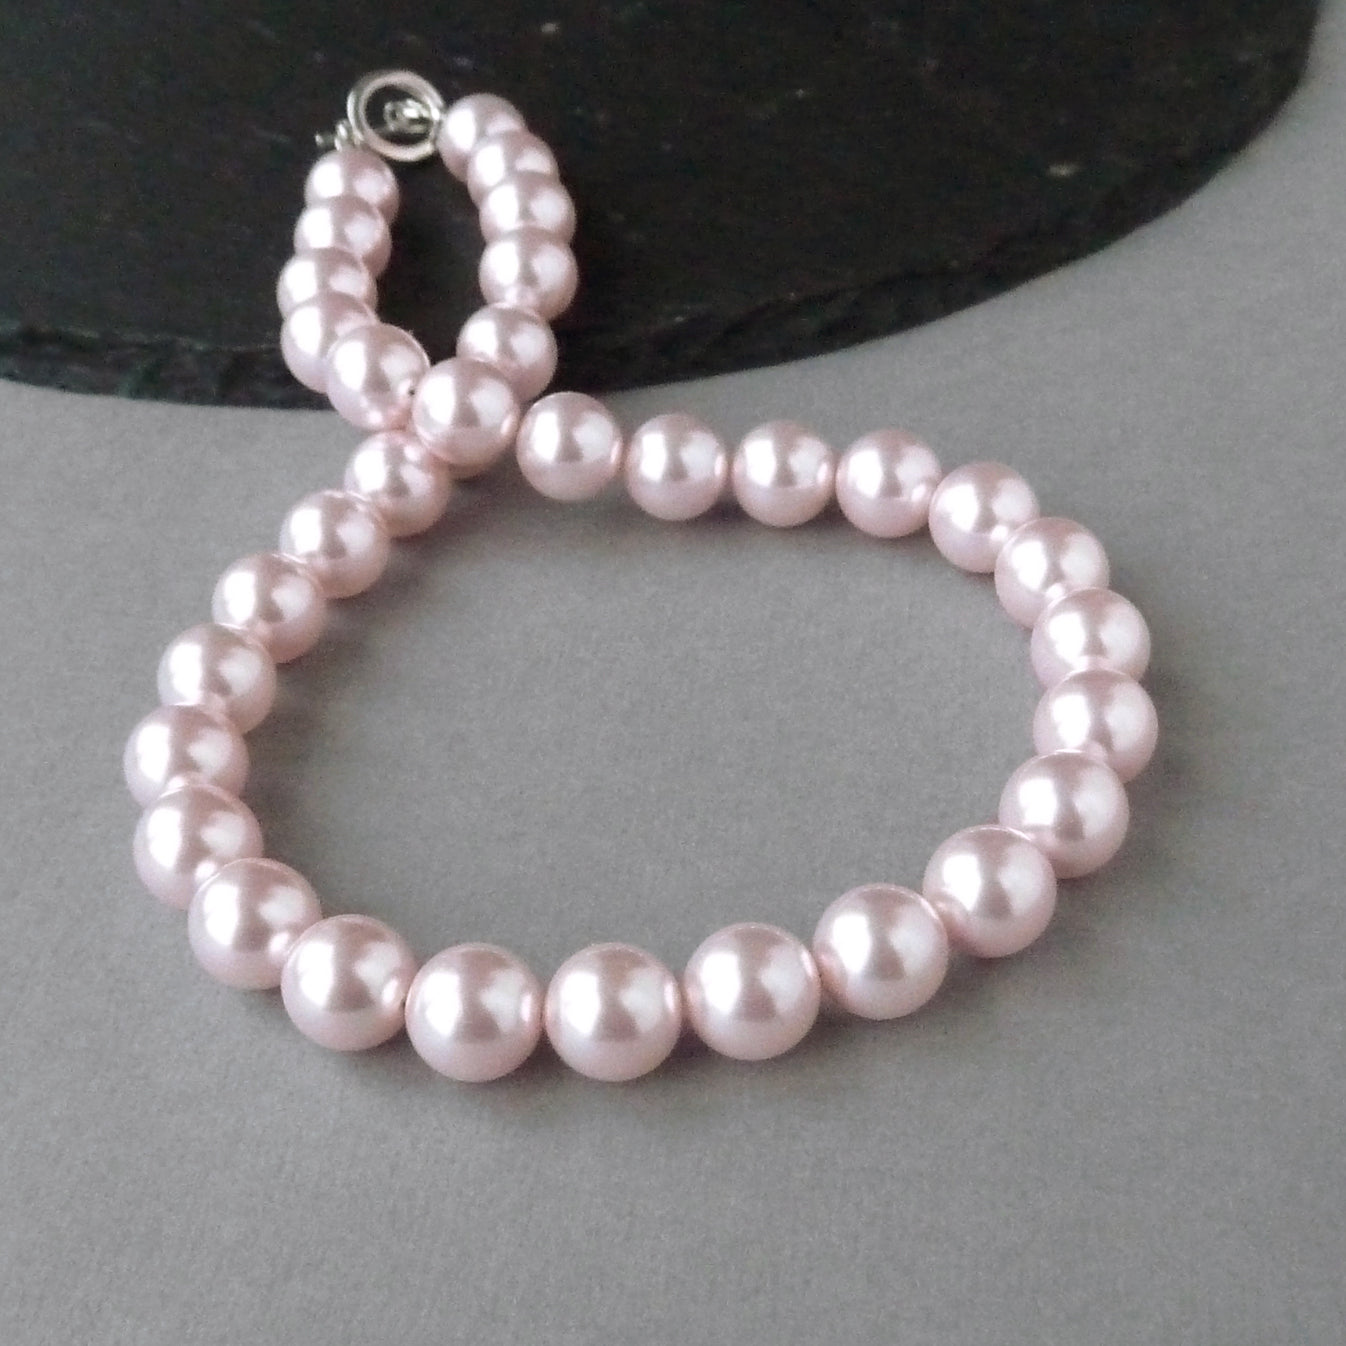 Chunky light pink pearl necklace